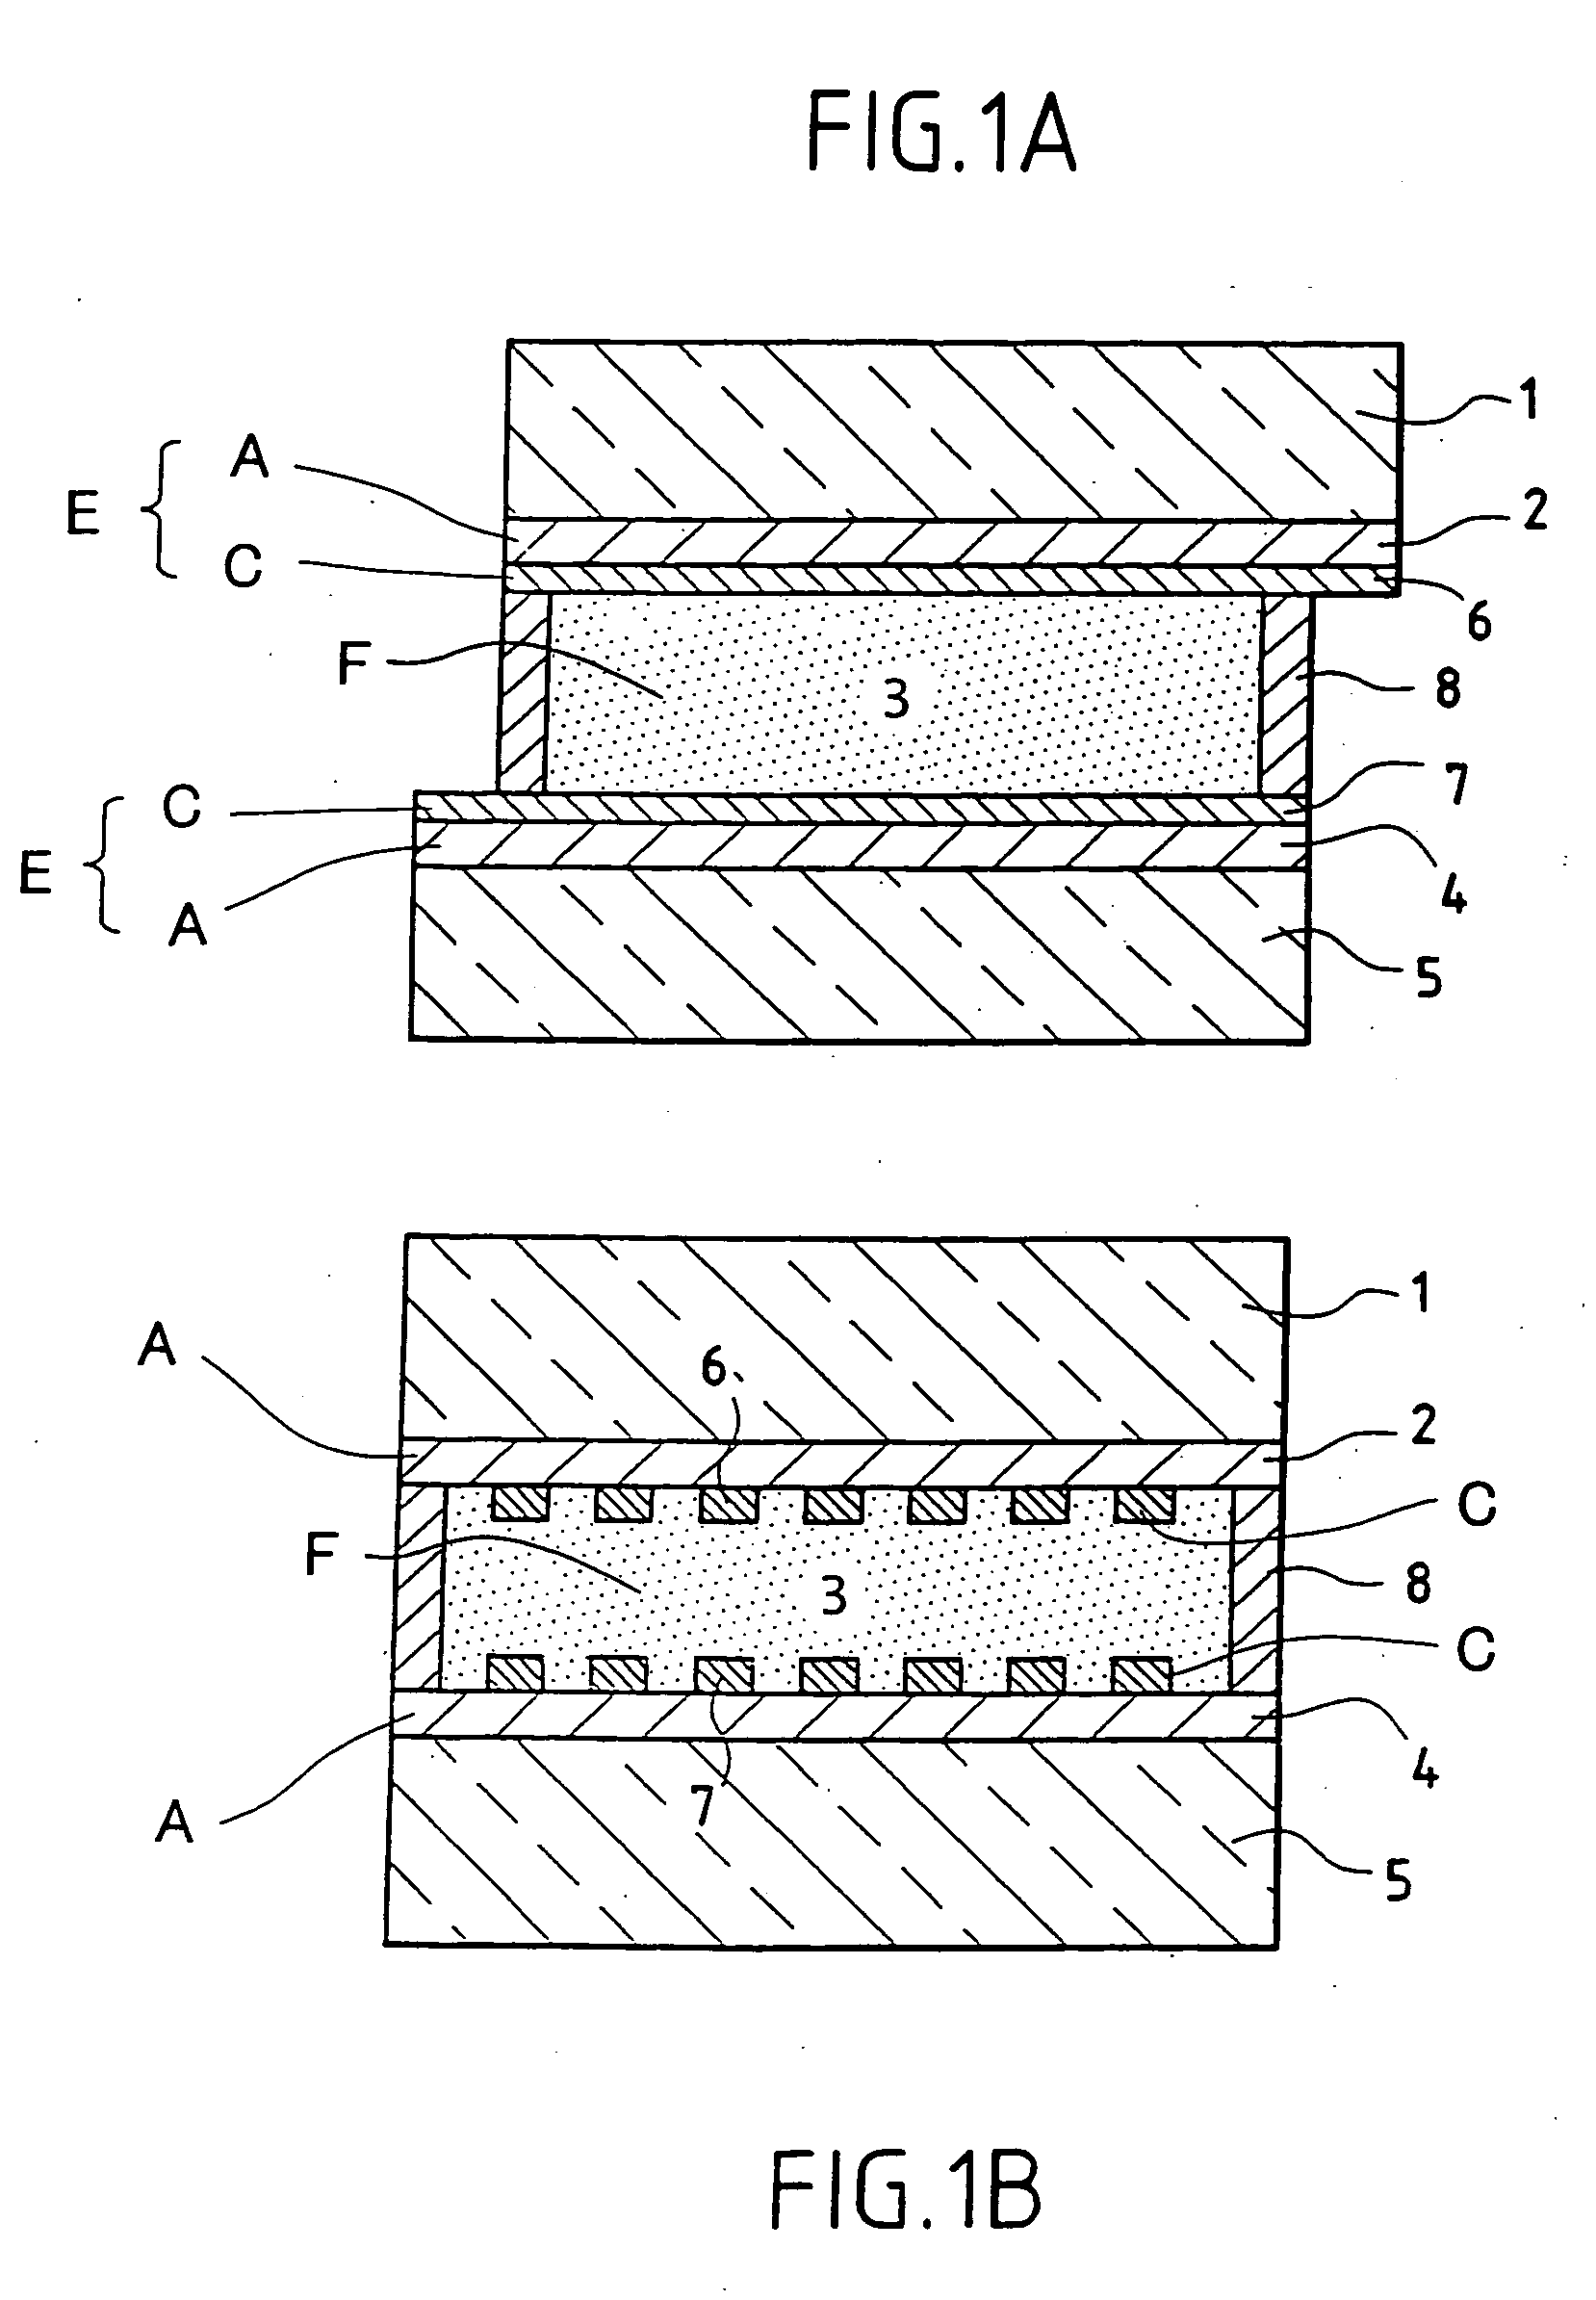 Electrochemical device, such as an electrically controlled system with variable optical and/or energy properties